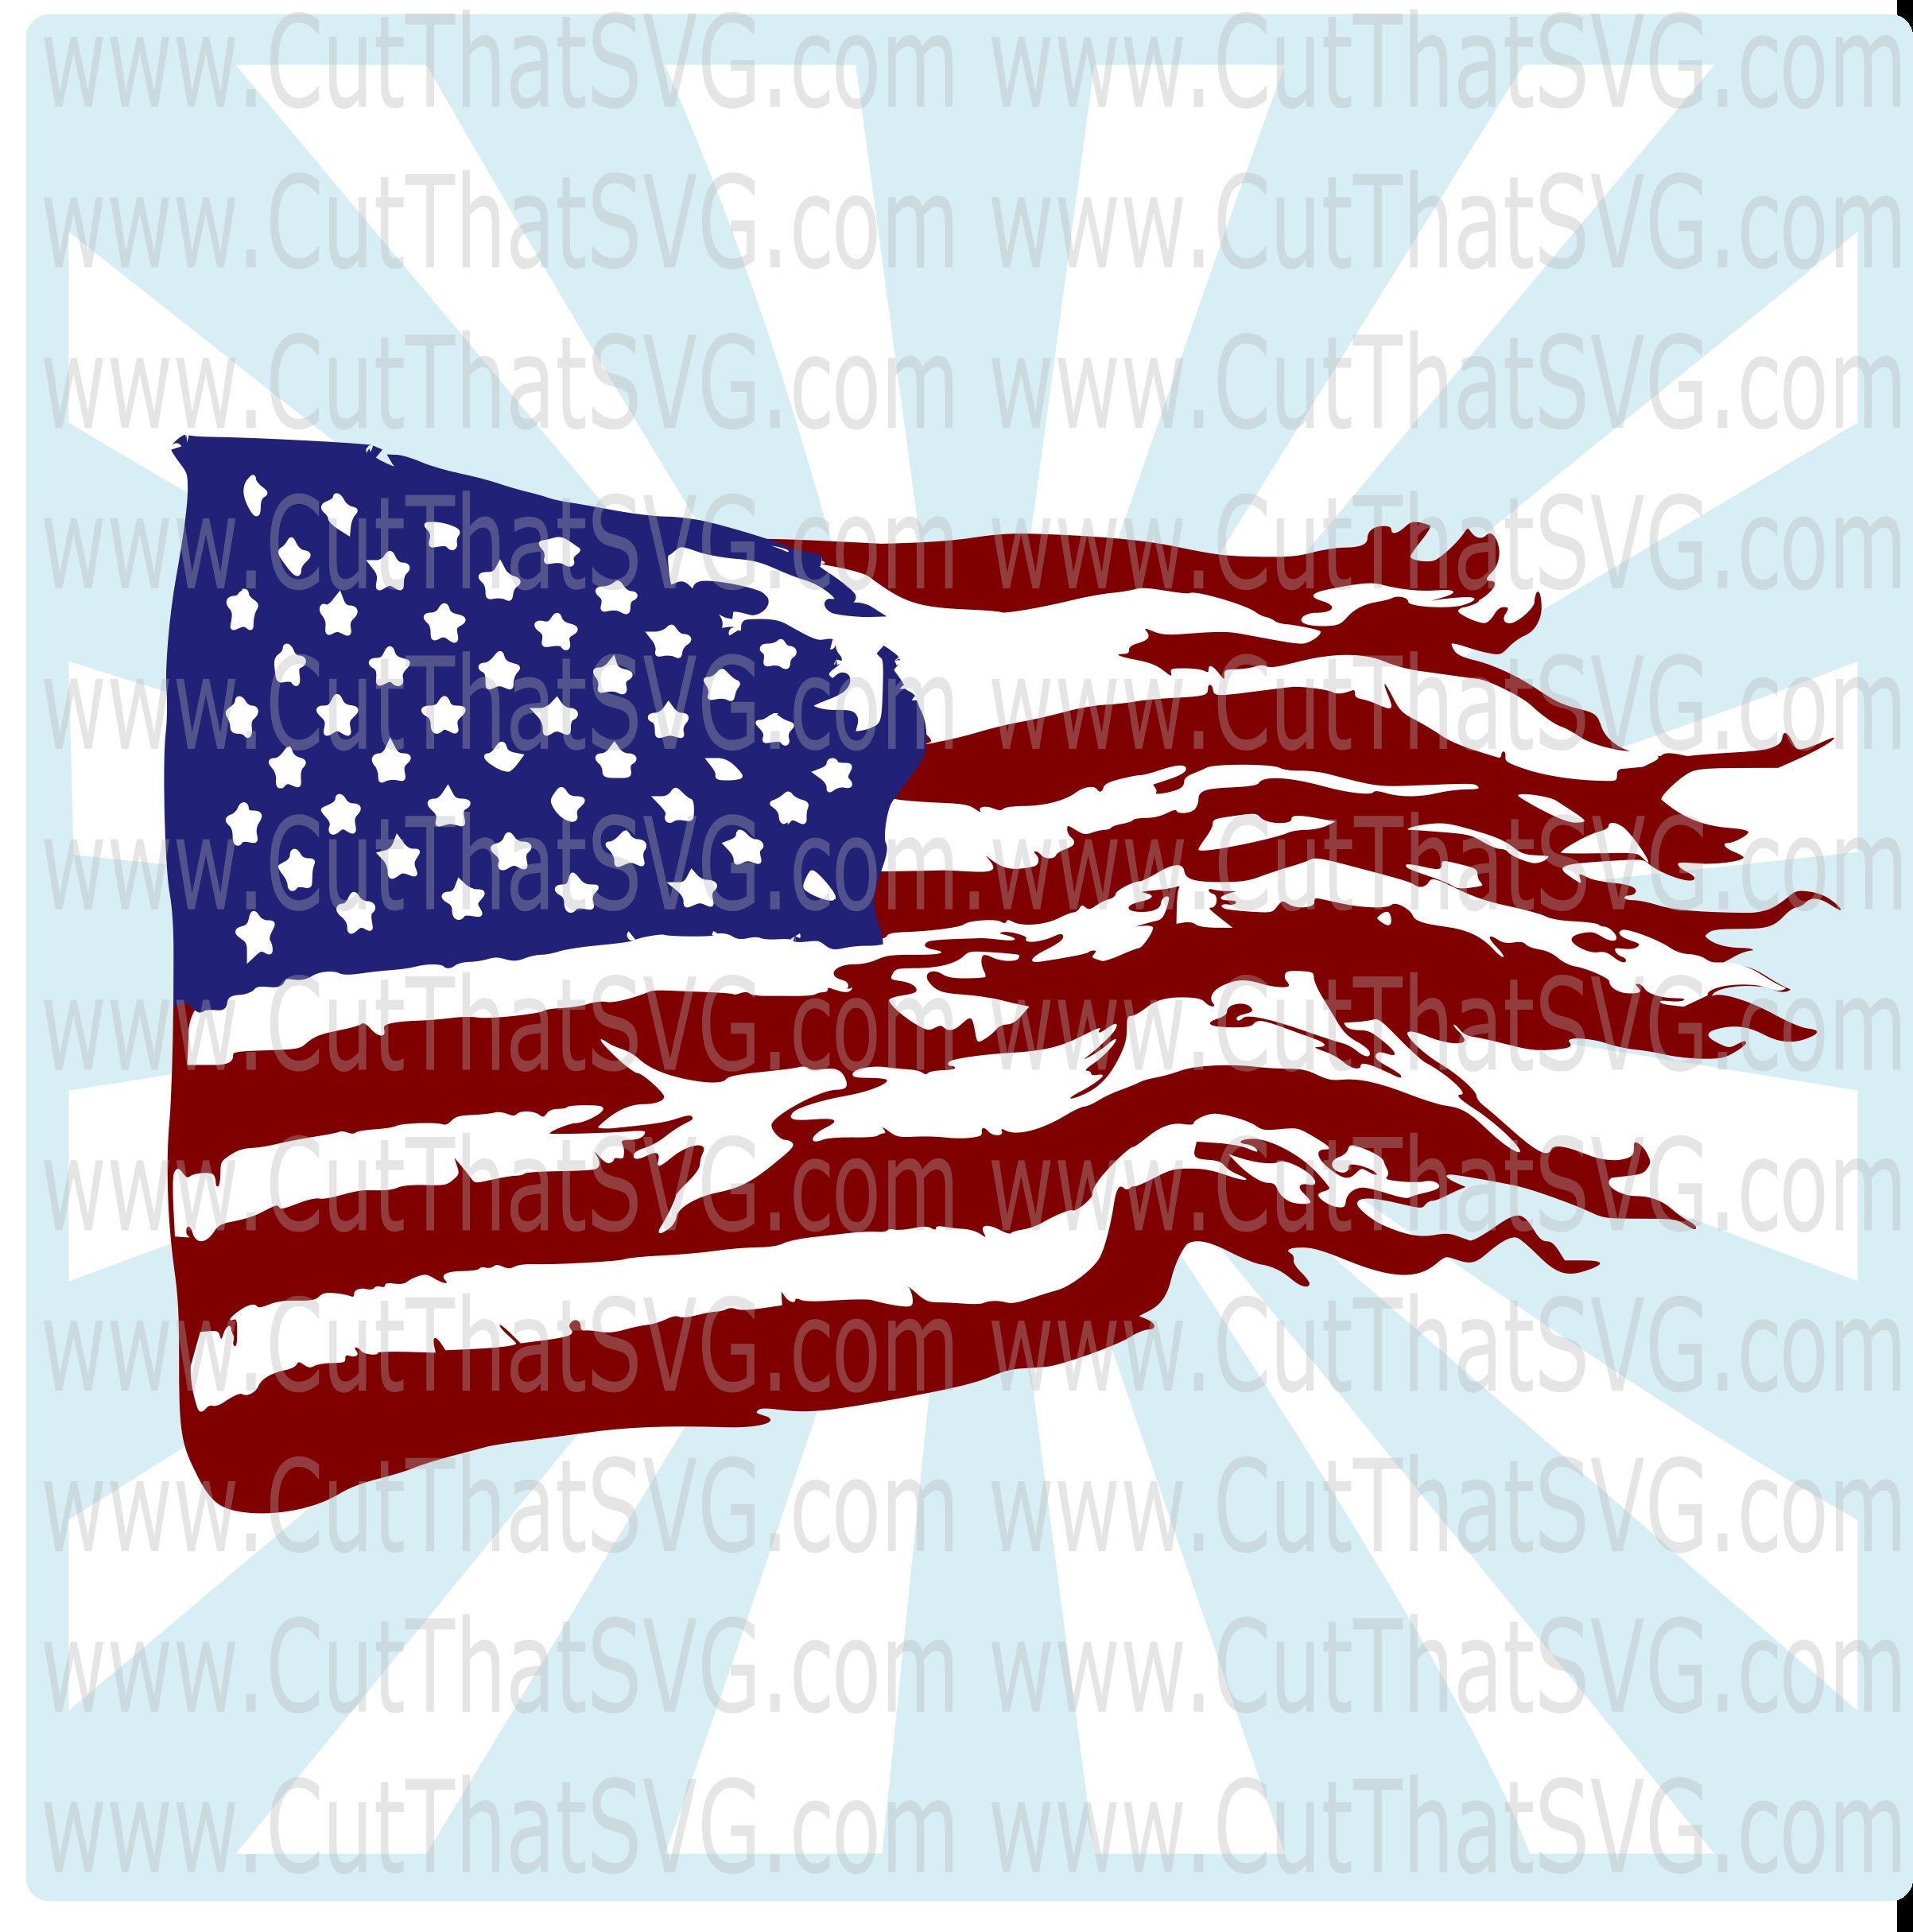 Download American Flag SVG Cut File from CutThatSVG on Etsy Studio